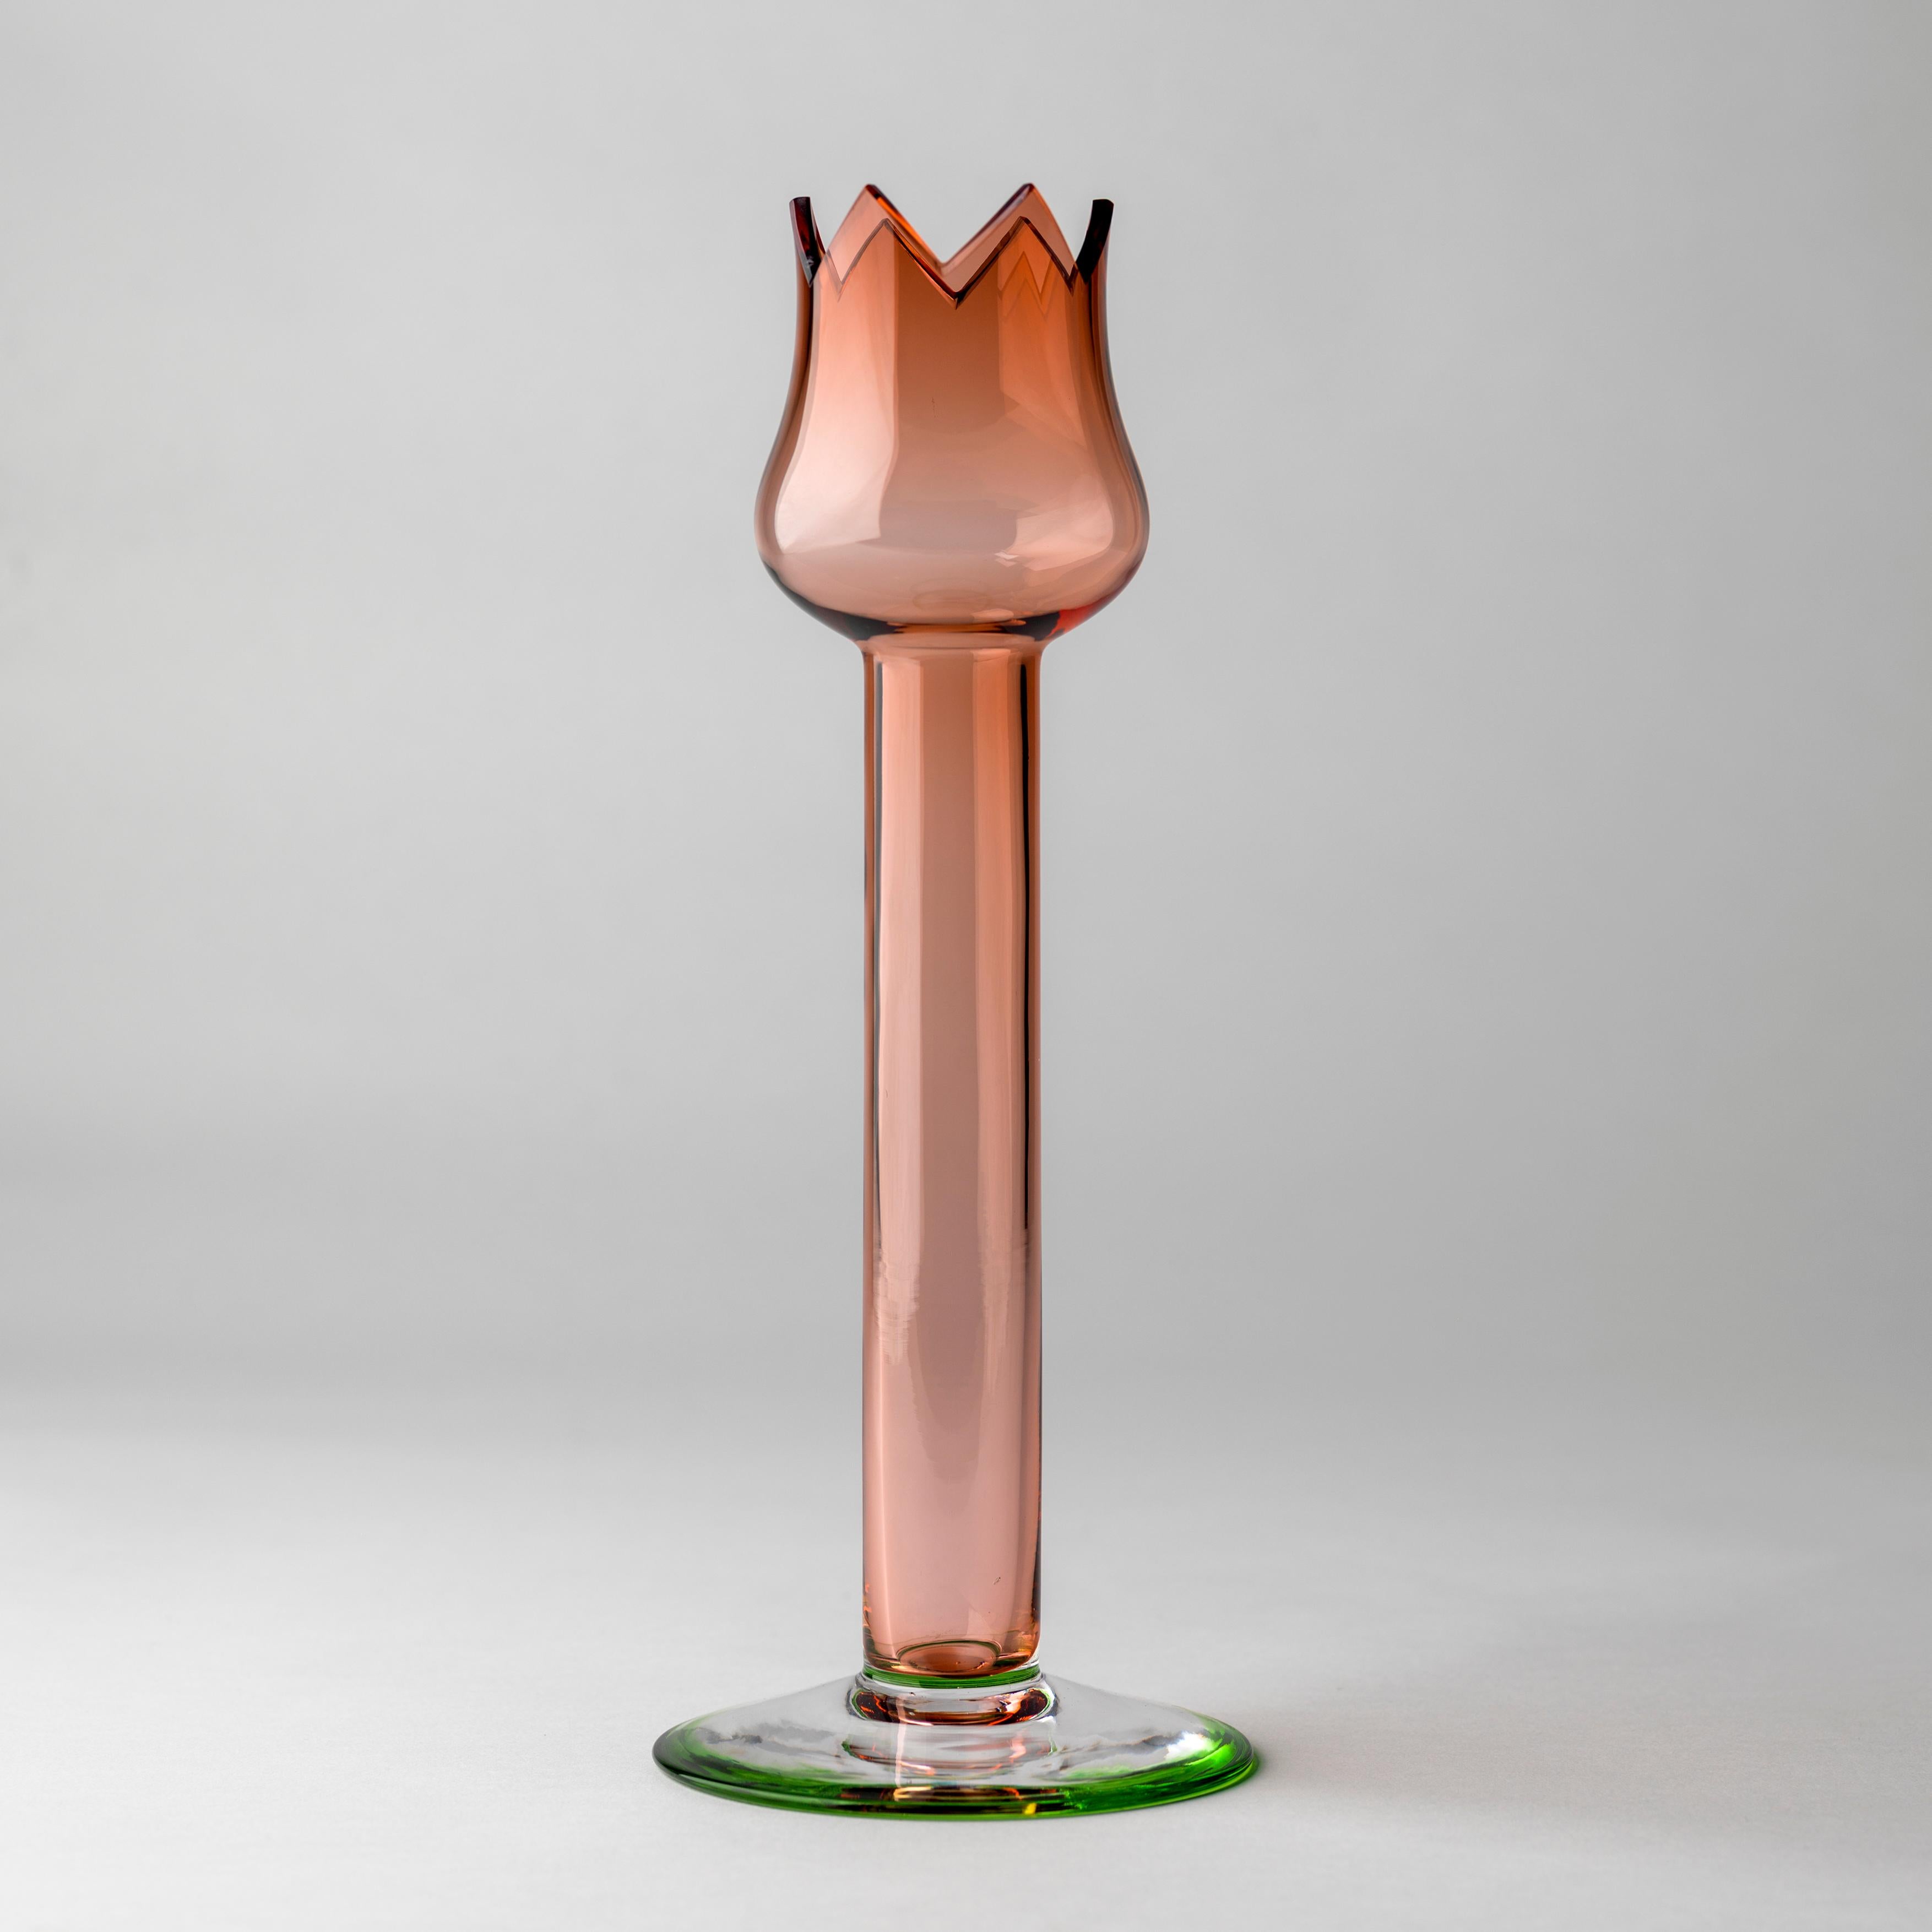 Spanish Contemporary Glass Candleholder by Oscar Tusquets for BD